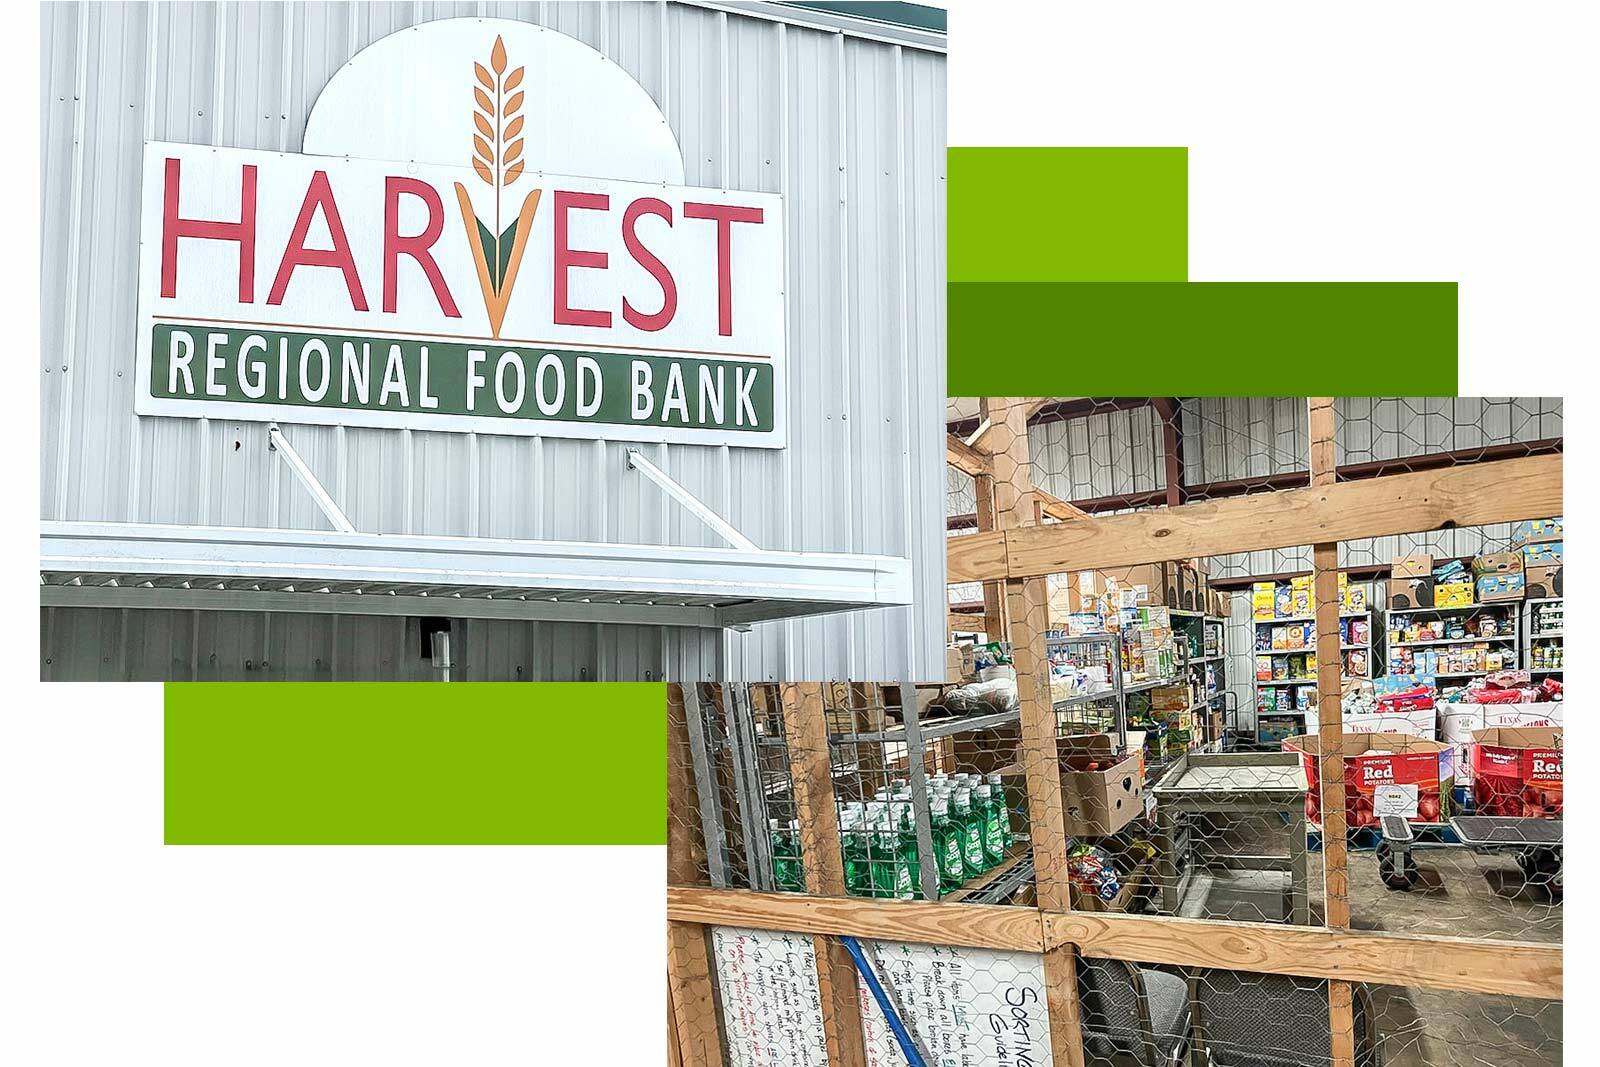 Harvest Regional Foodback exteriour sign and interior photograph